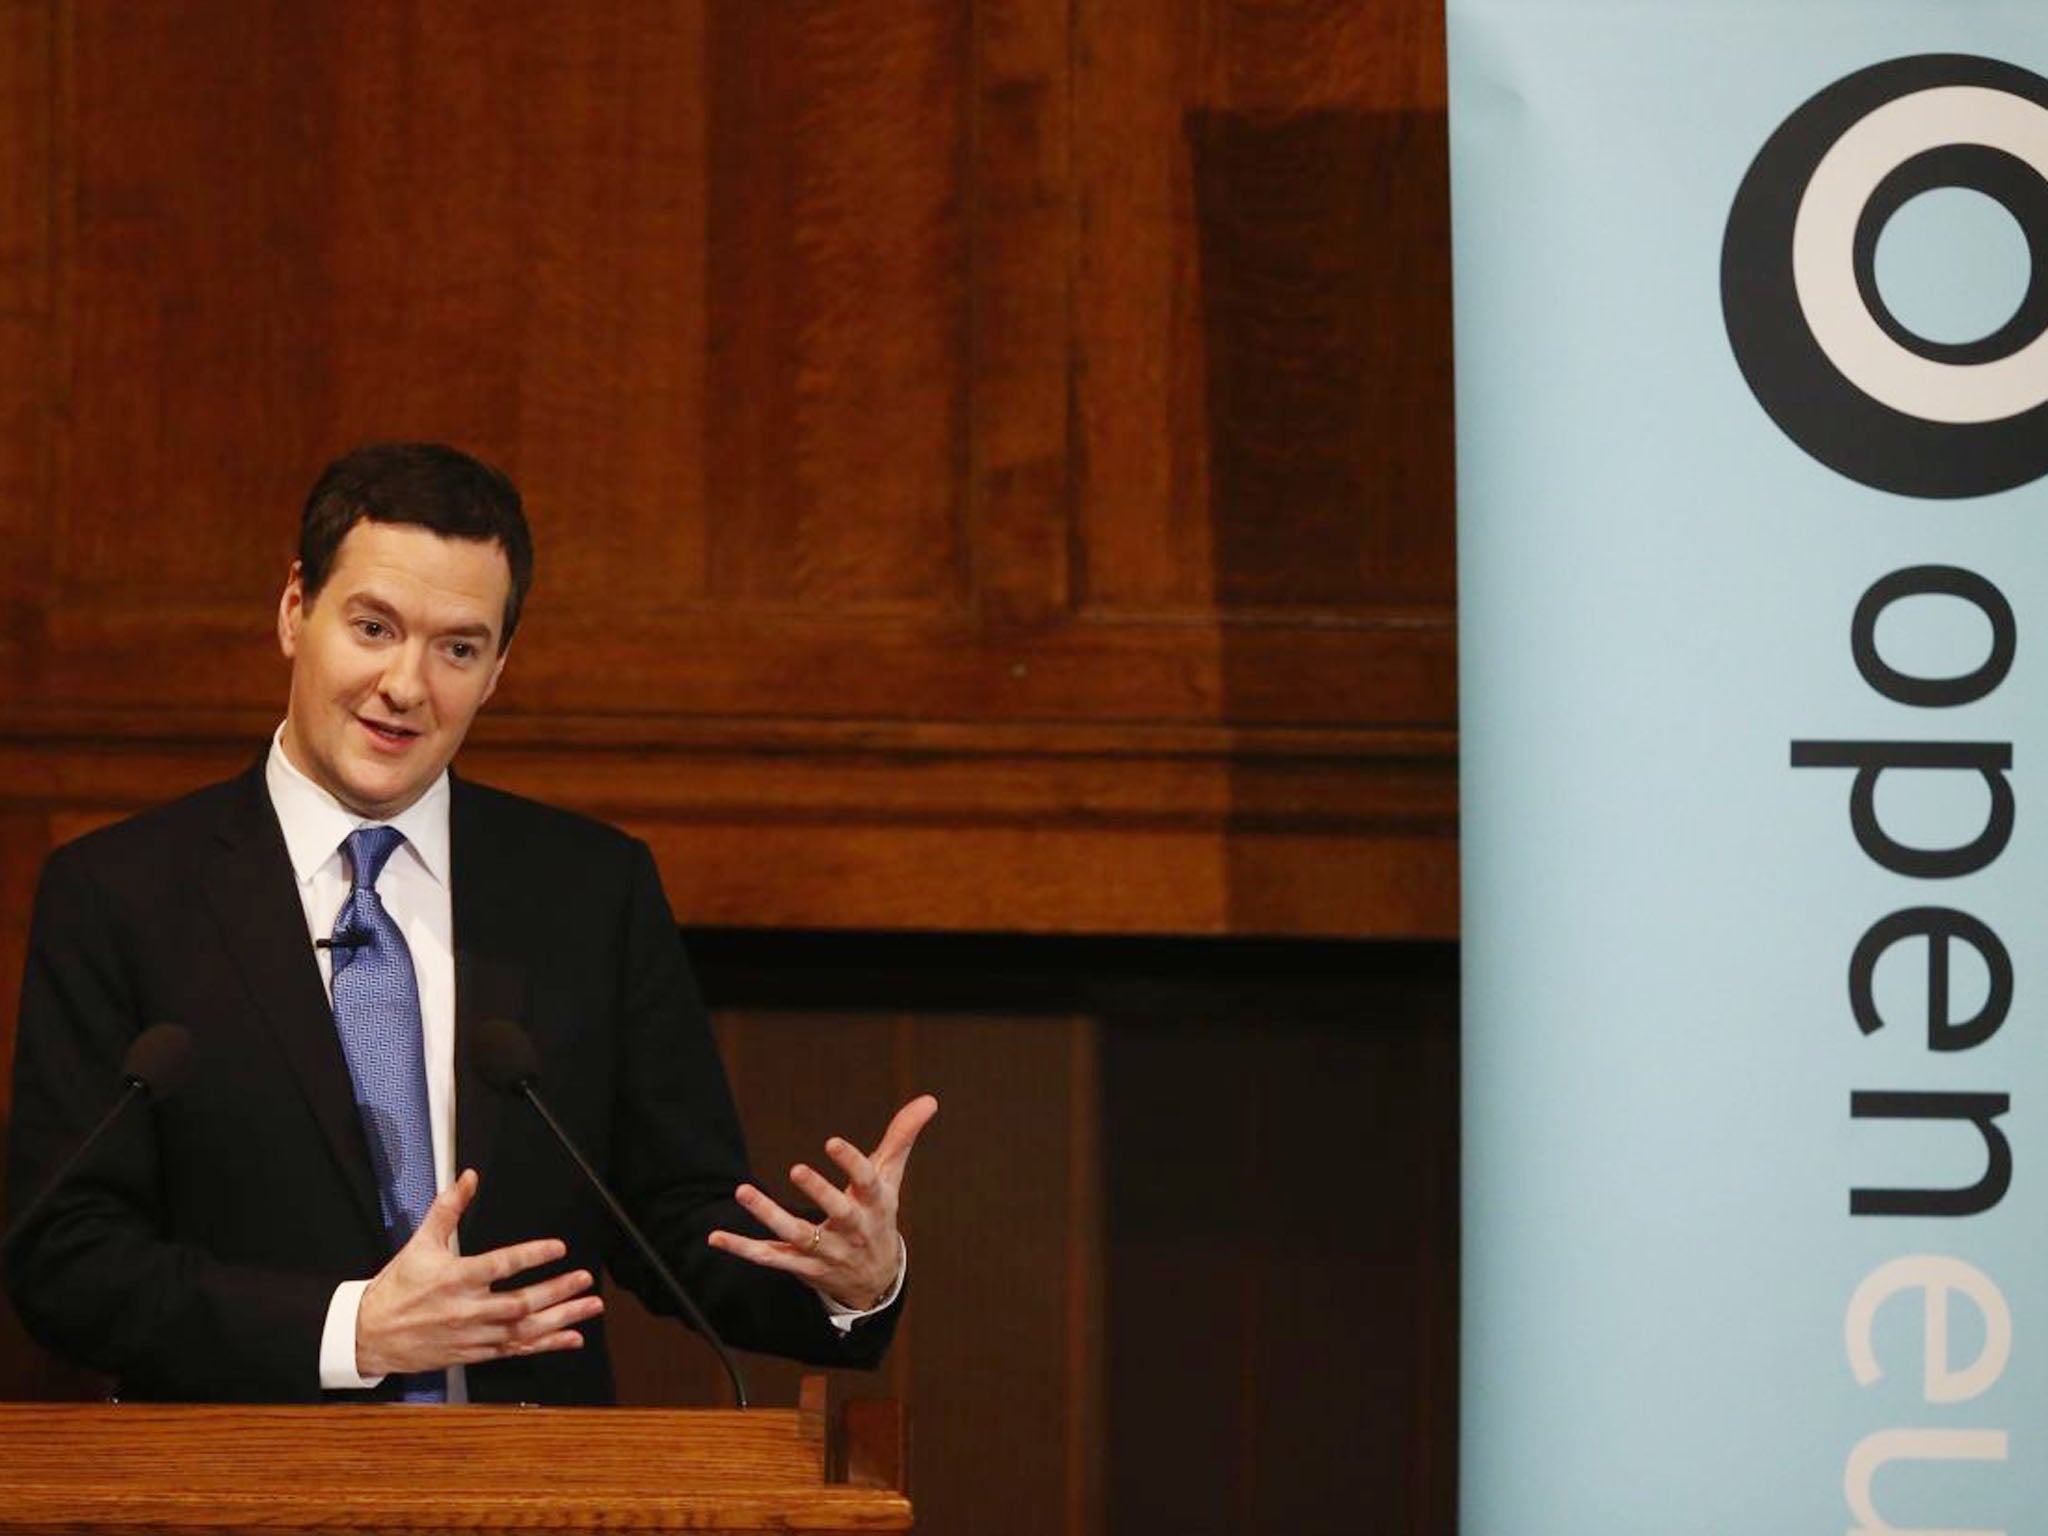 George Osborne delivered a warning that the EU should undergo reform, halting decline by backing business and curbing welfare spending